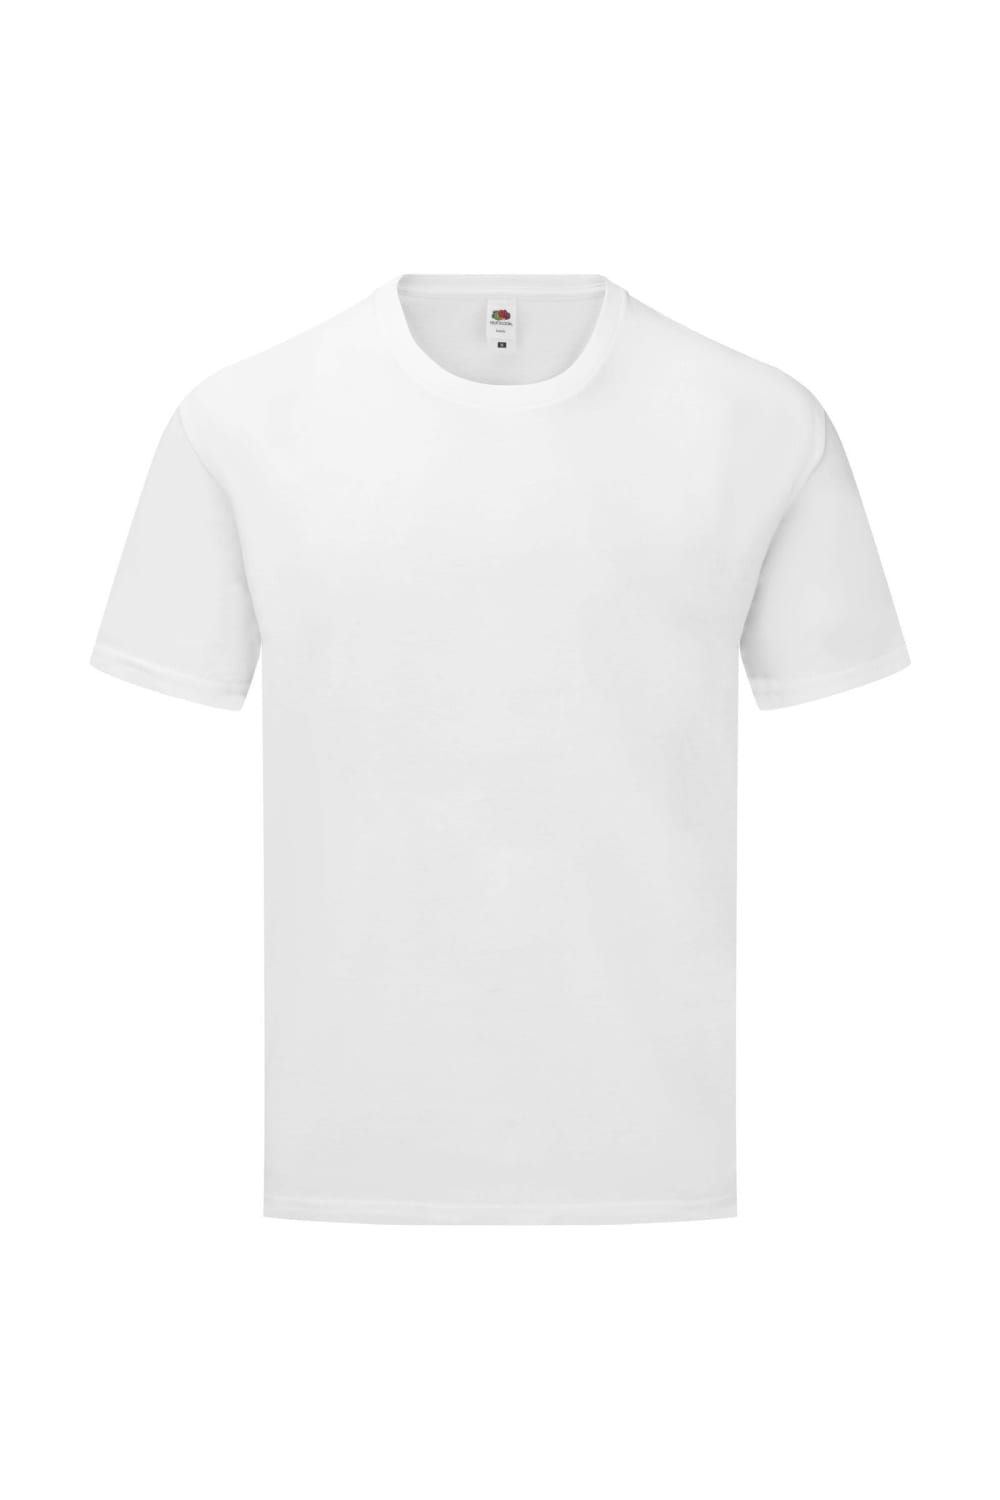 Fruit of the Loom Mens Iconic 165 Classic T-Shirt (White)